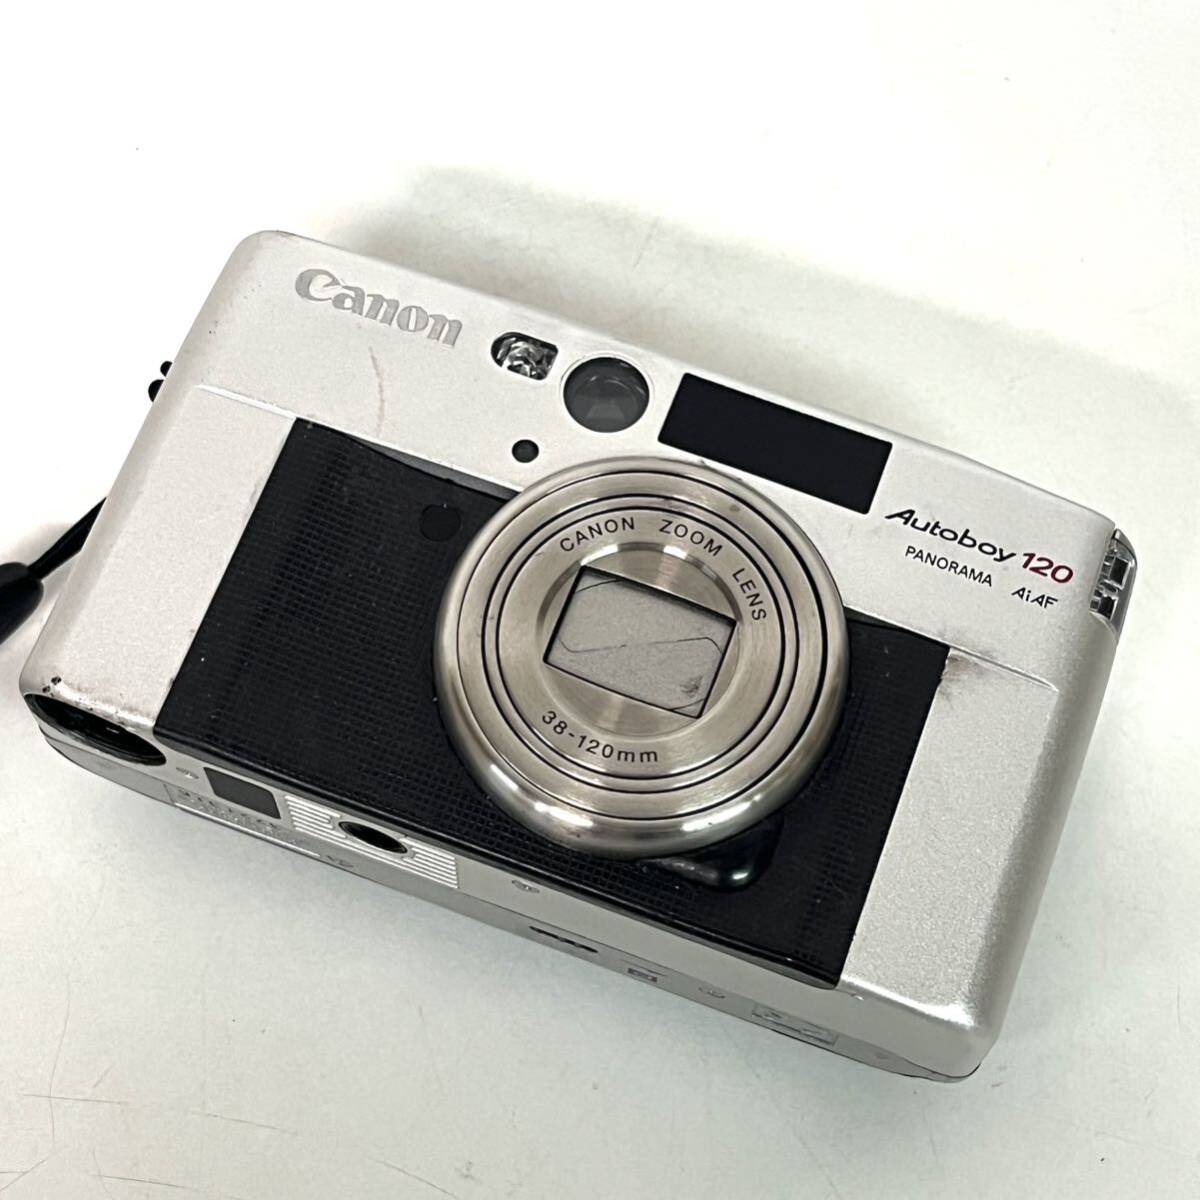 CANON キヤノン AUTOBOY 120 PANORAMA AIAF 38-120 ジャンク フィルムカメラ コンパクト_画像1